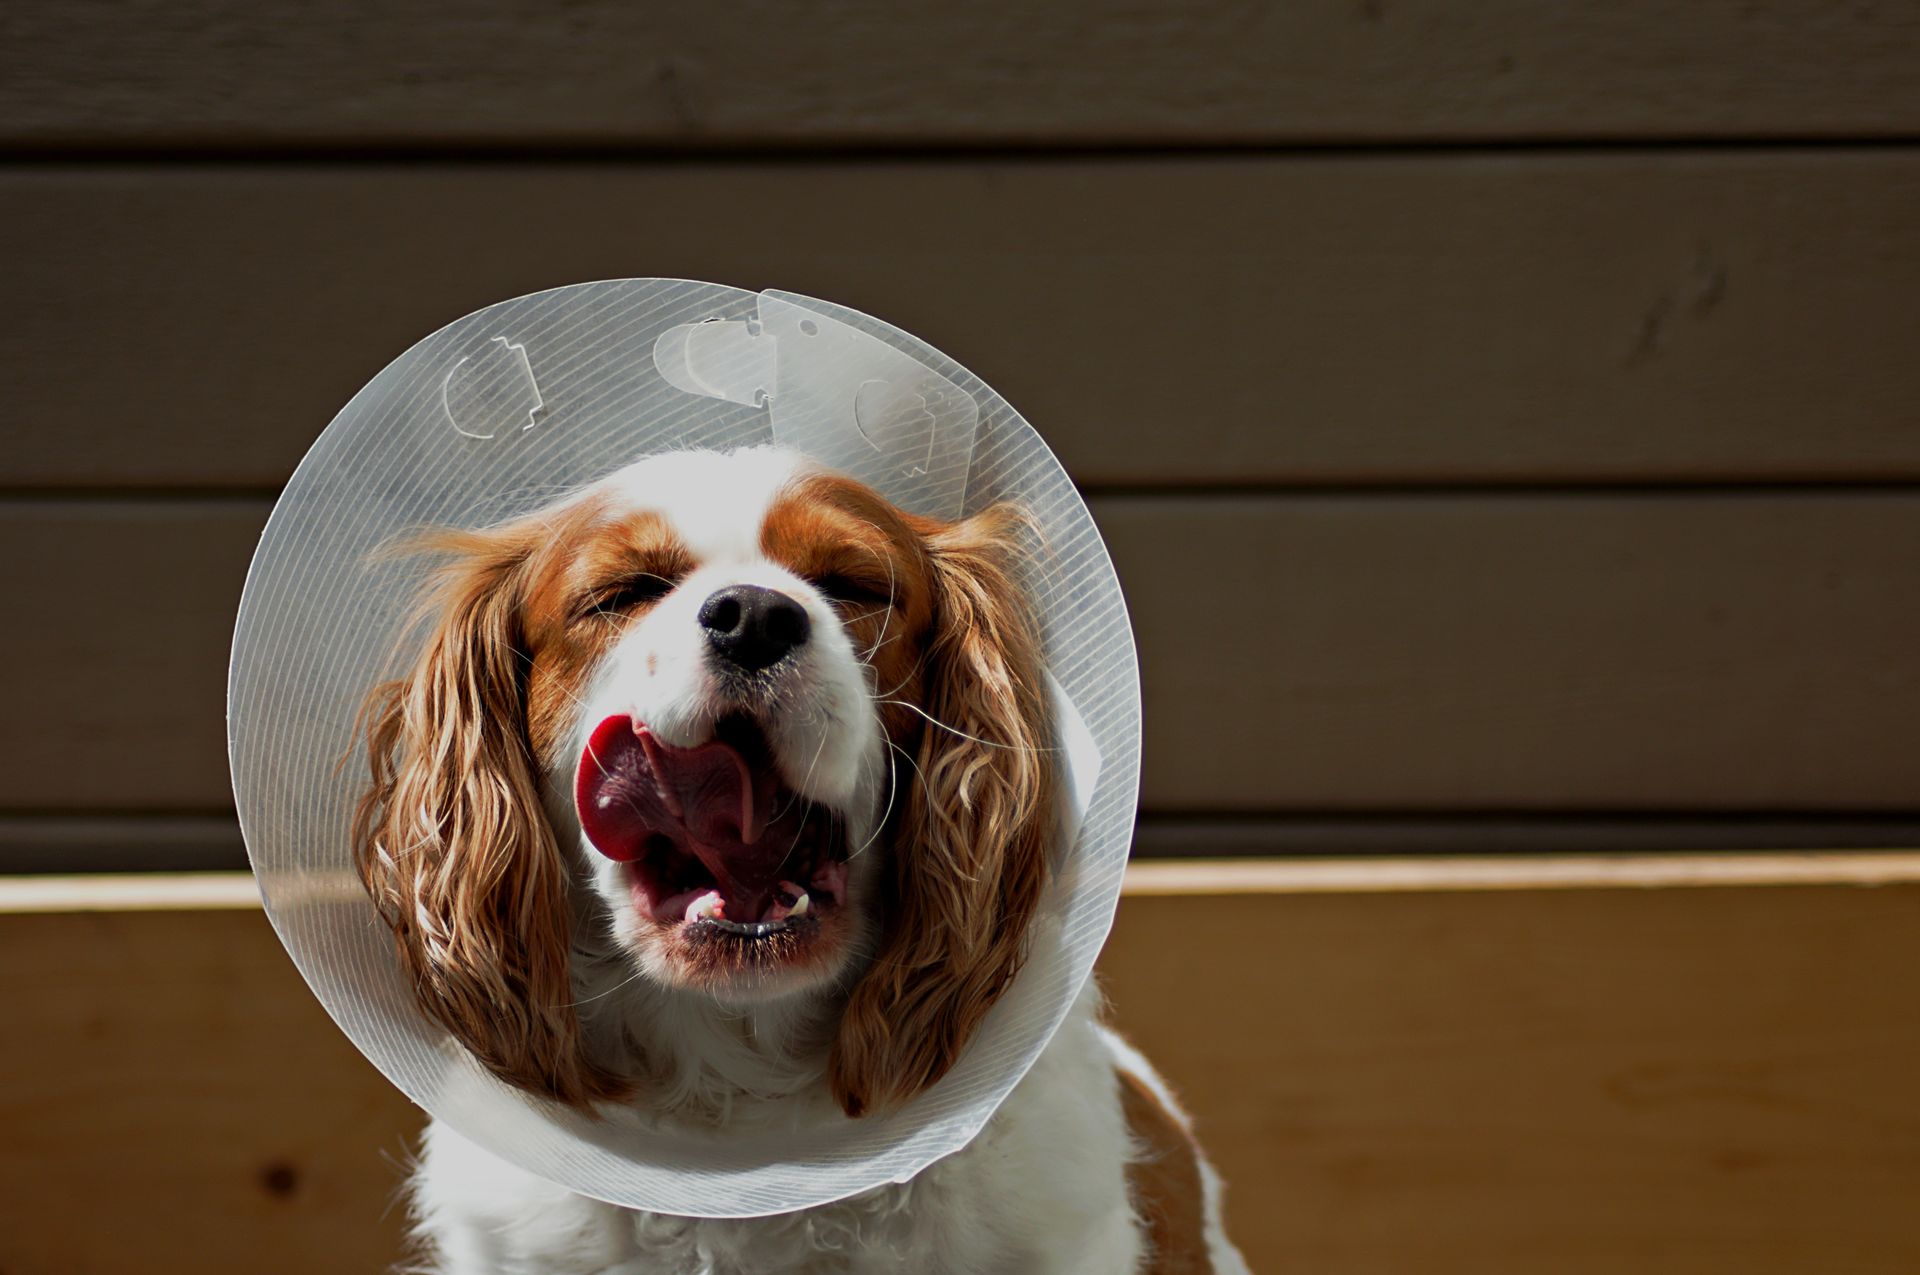 king charles cavalier spaniel with cone on head at vets